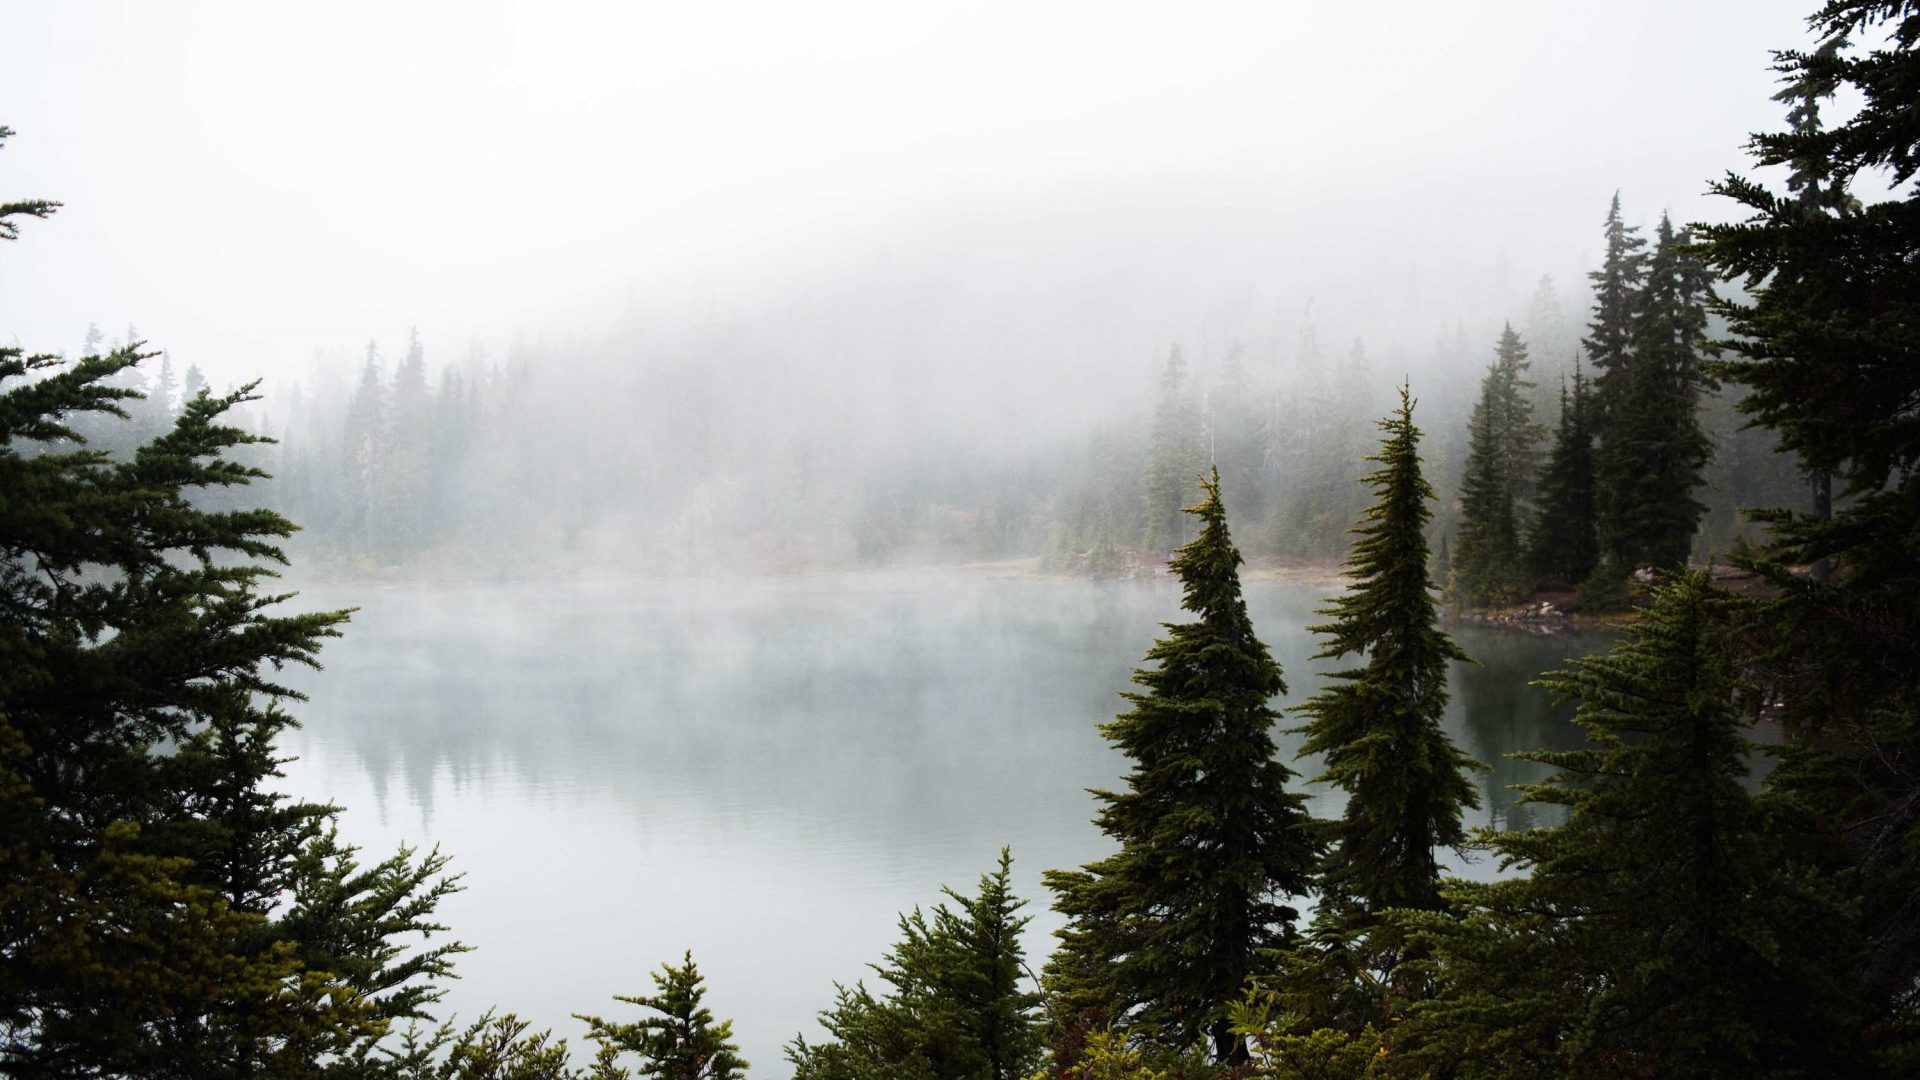 A fog covered lake surrounded by pine trees.